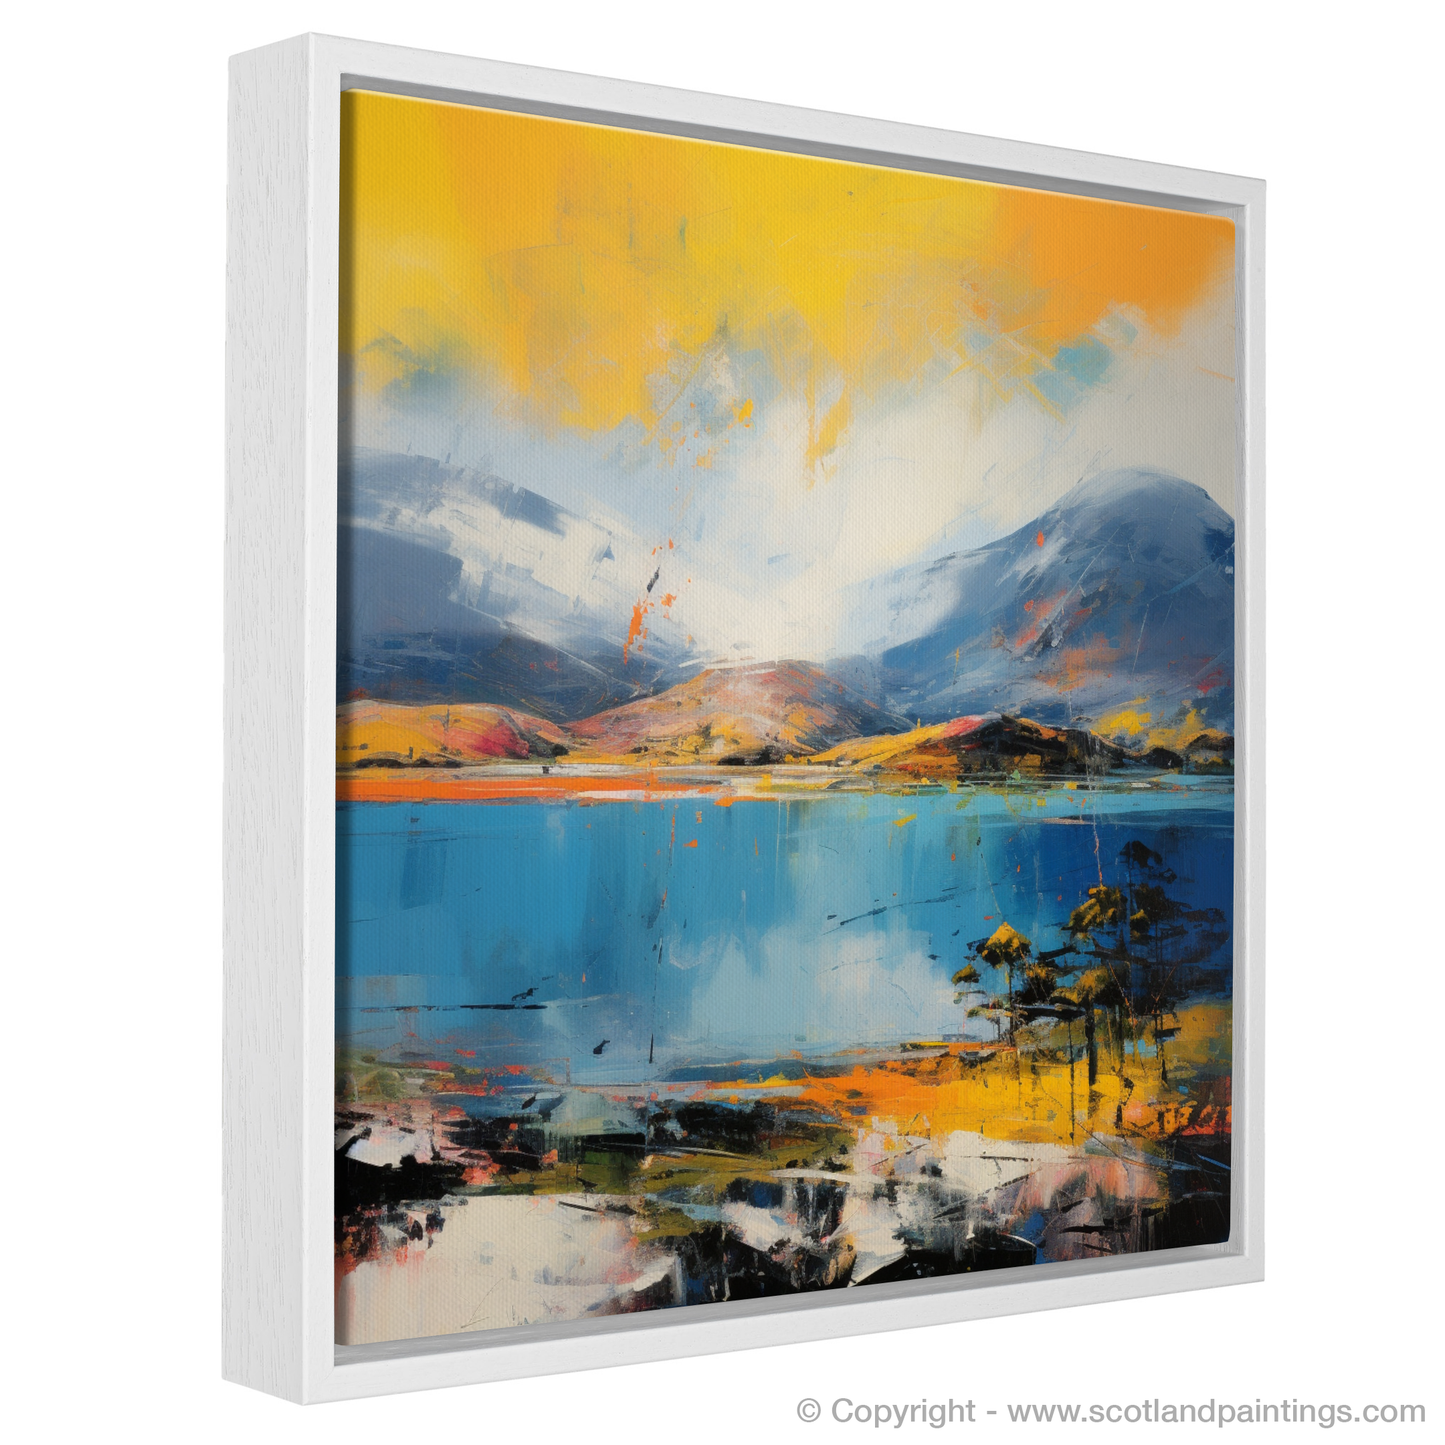 Painting and Art Print of Loch Maree, Wester Ross in summer entitled "Summer Blaze at Loch Maree".